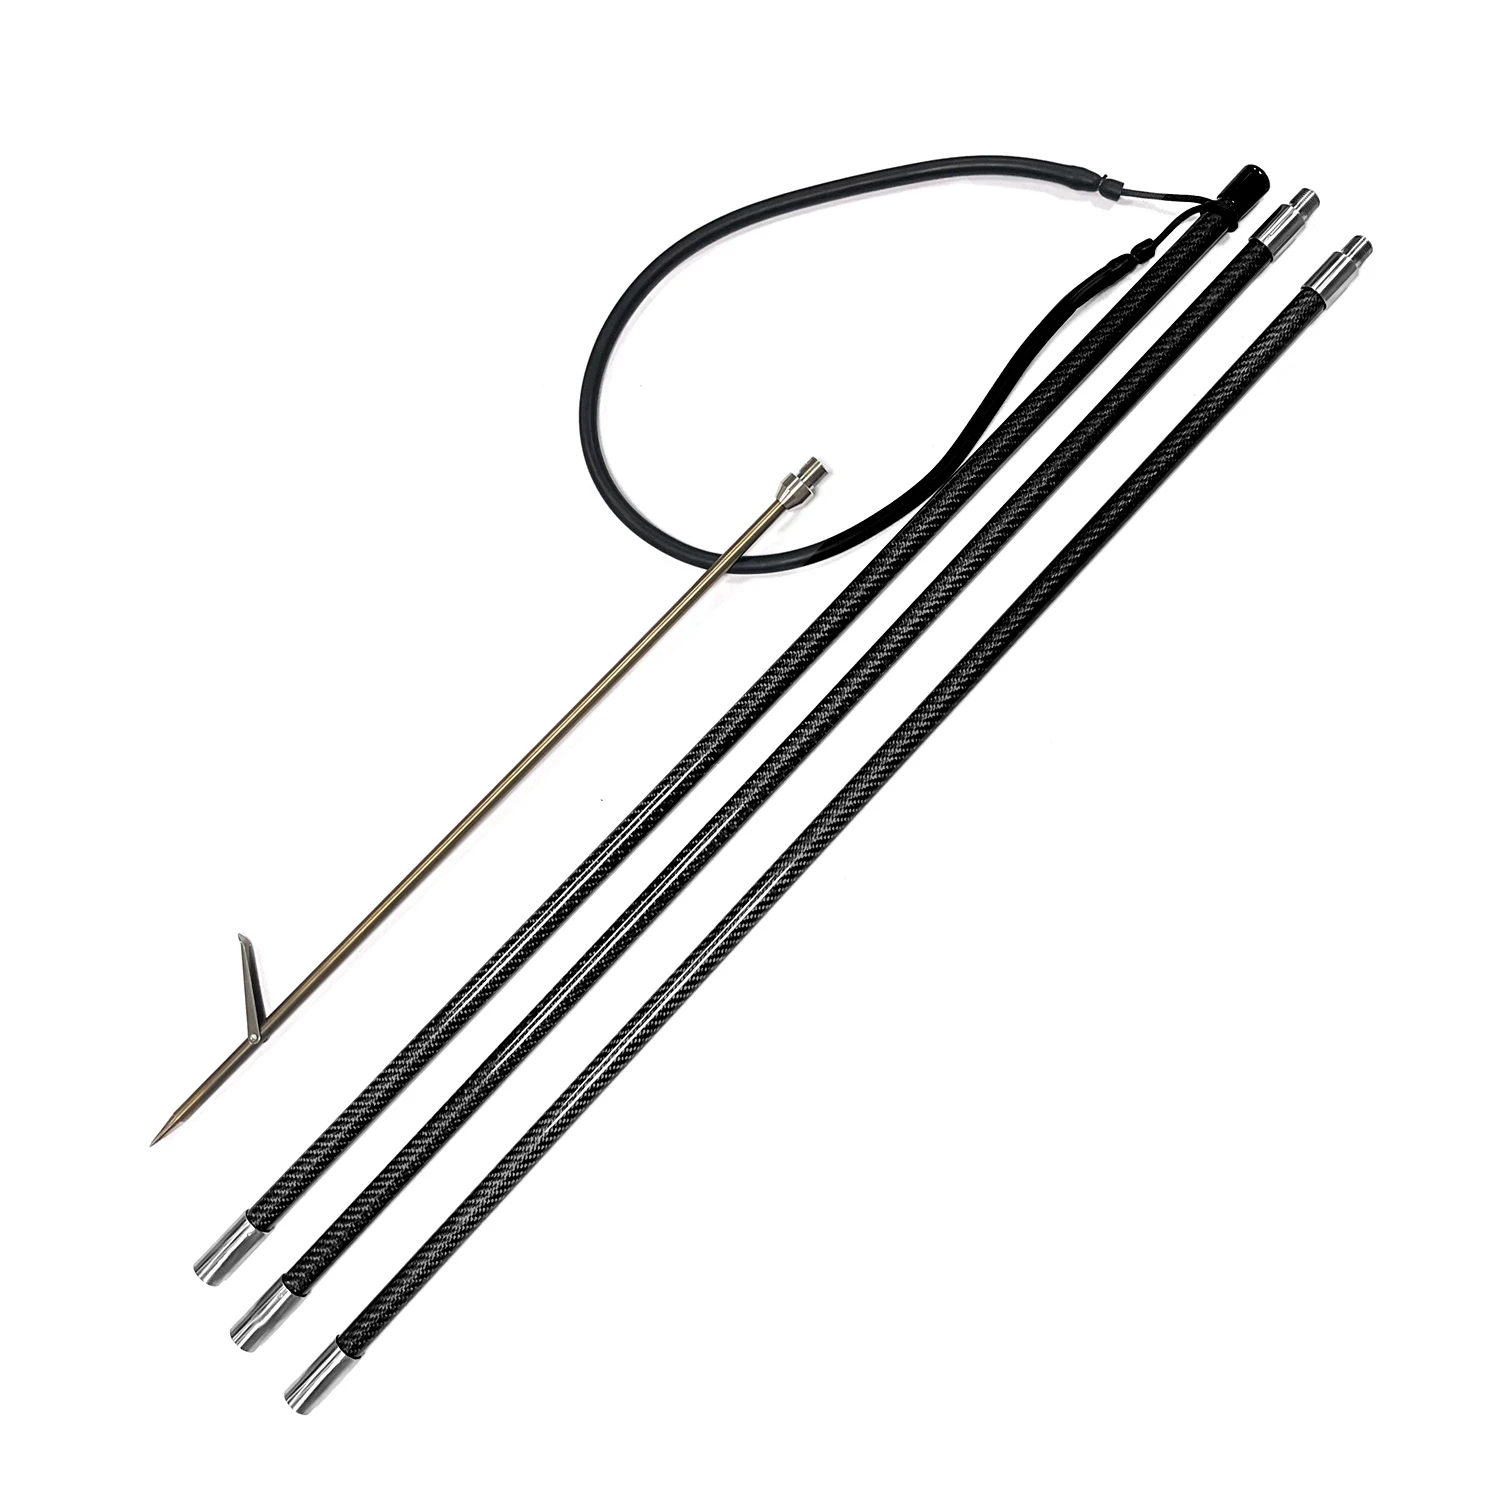 Spearfishing Spear Travel Hand Pole Spear Carbon Diving Fish Spear